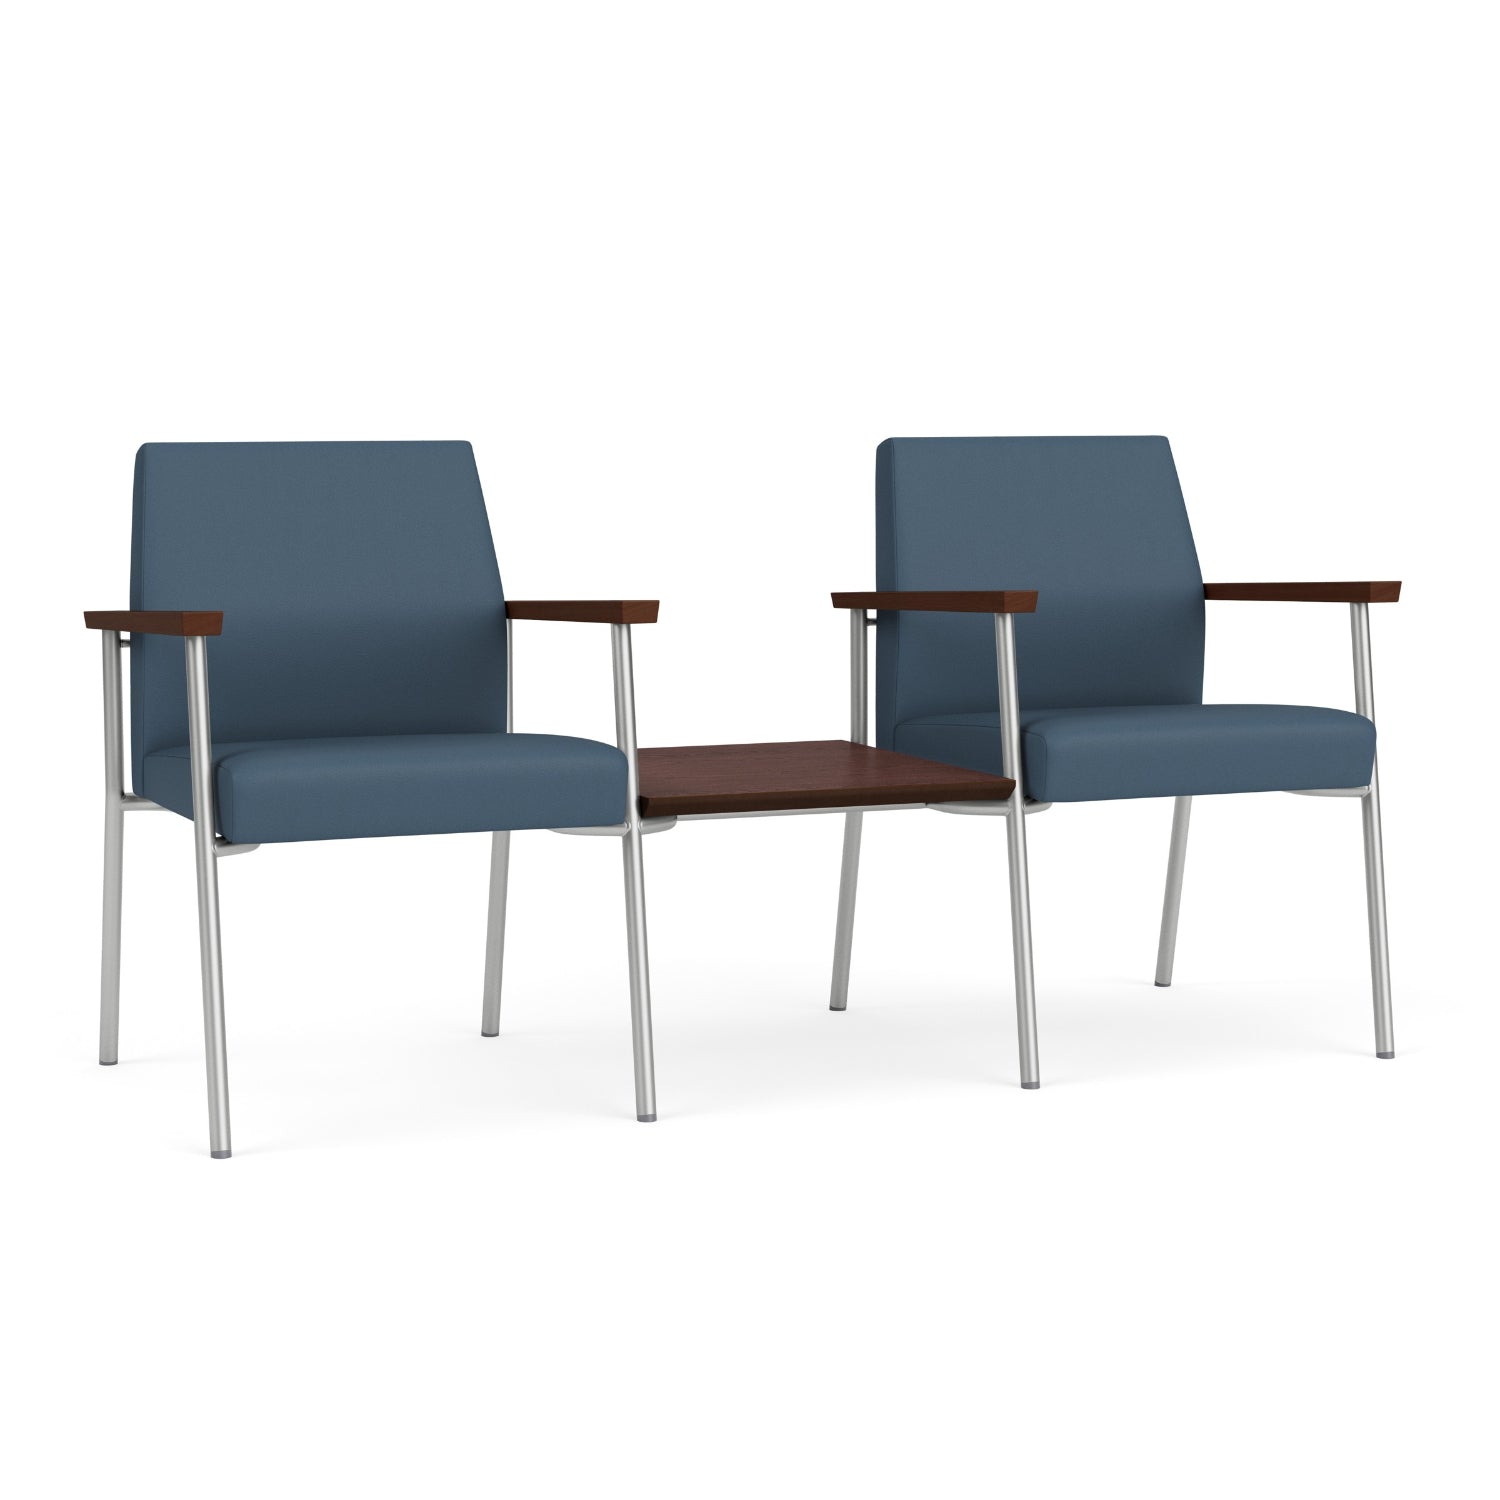 Mystic Guest Collection Reception Seating, 2 Chairs with Connecting Center Table, Standard Vinyl Upholstery, FREE SHIPPING